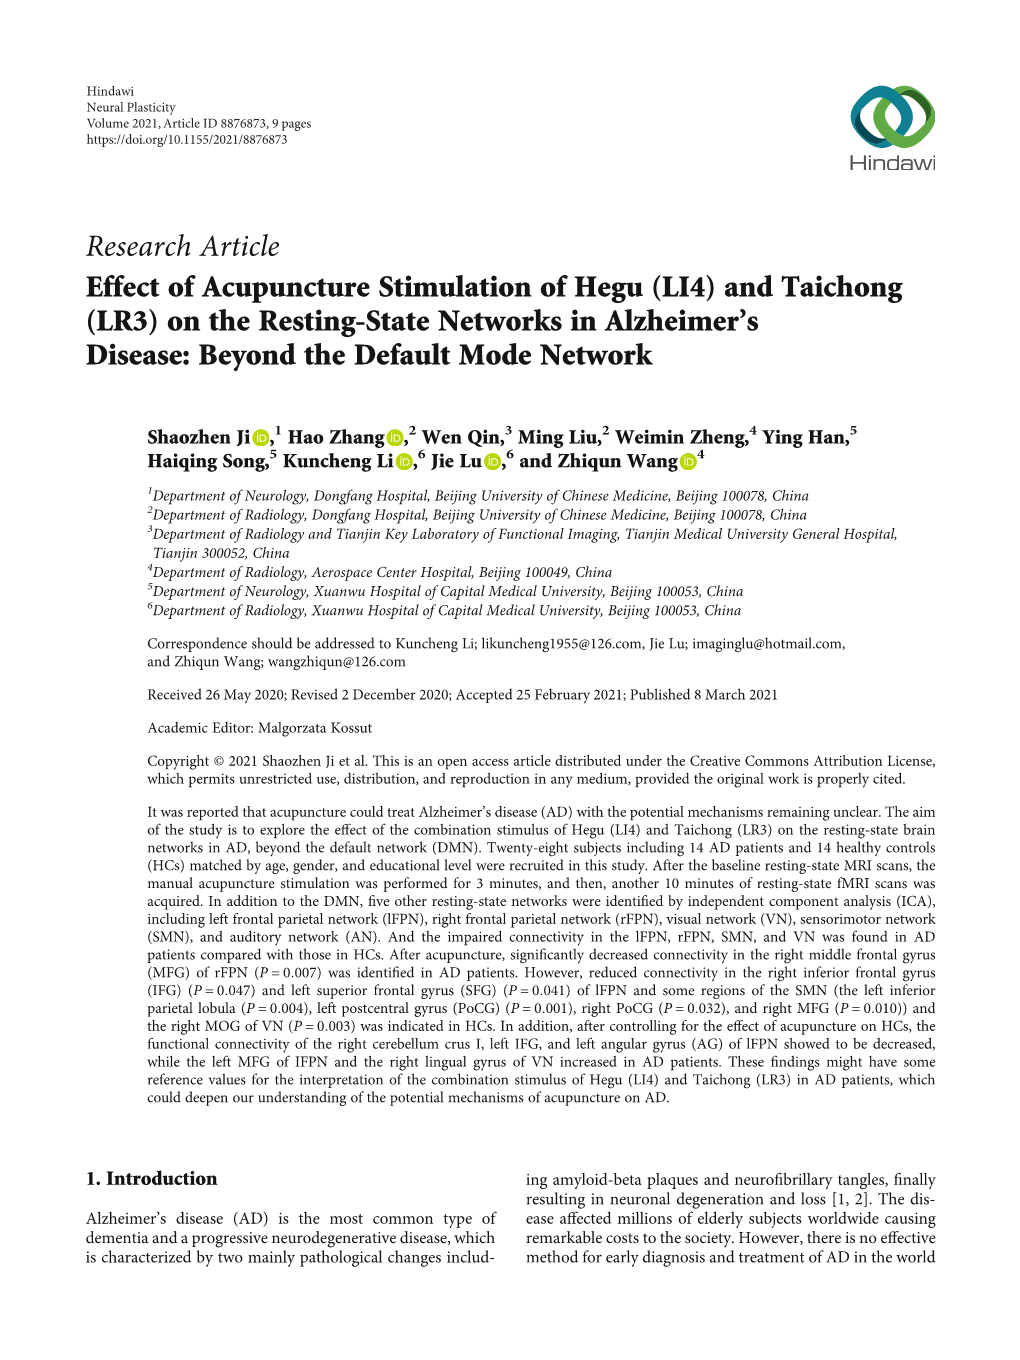 Effect of Acupuncture Stimulation of Hegu (LI4) and Taichong (LR3) on the Resting-State Networks in Alzheimer’S Disease: Beyond the Default Mode Network